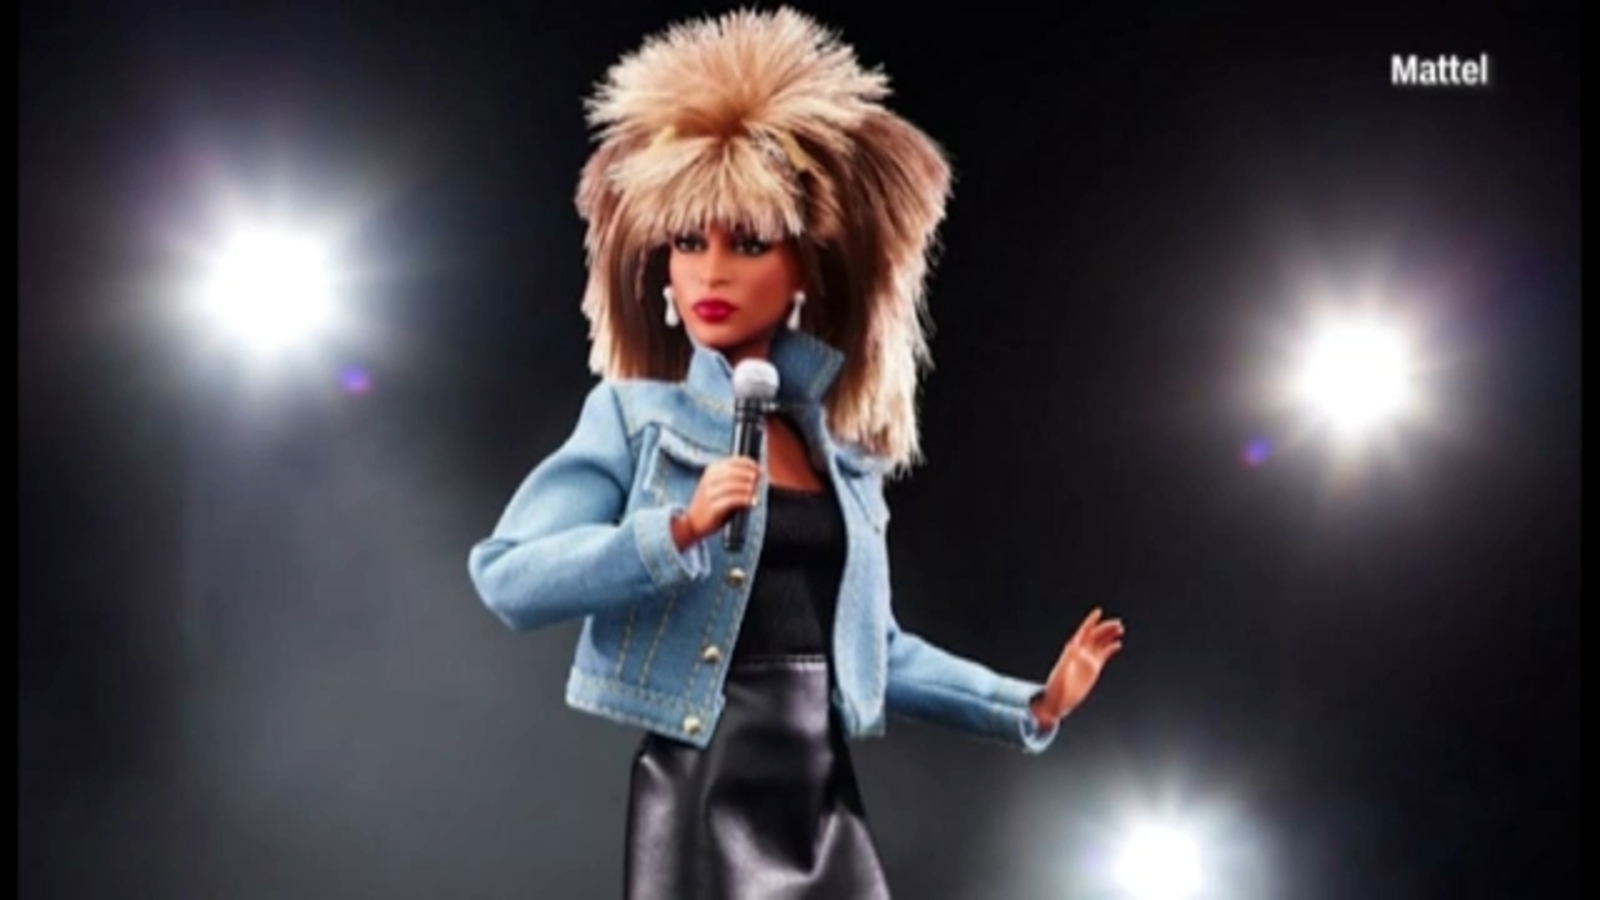 Tina Turner honored by Barbie as latest icon added to collection that honors trailblazing women